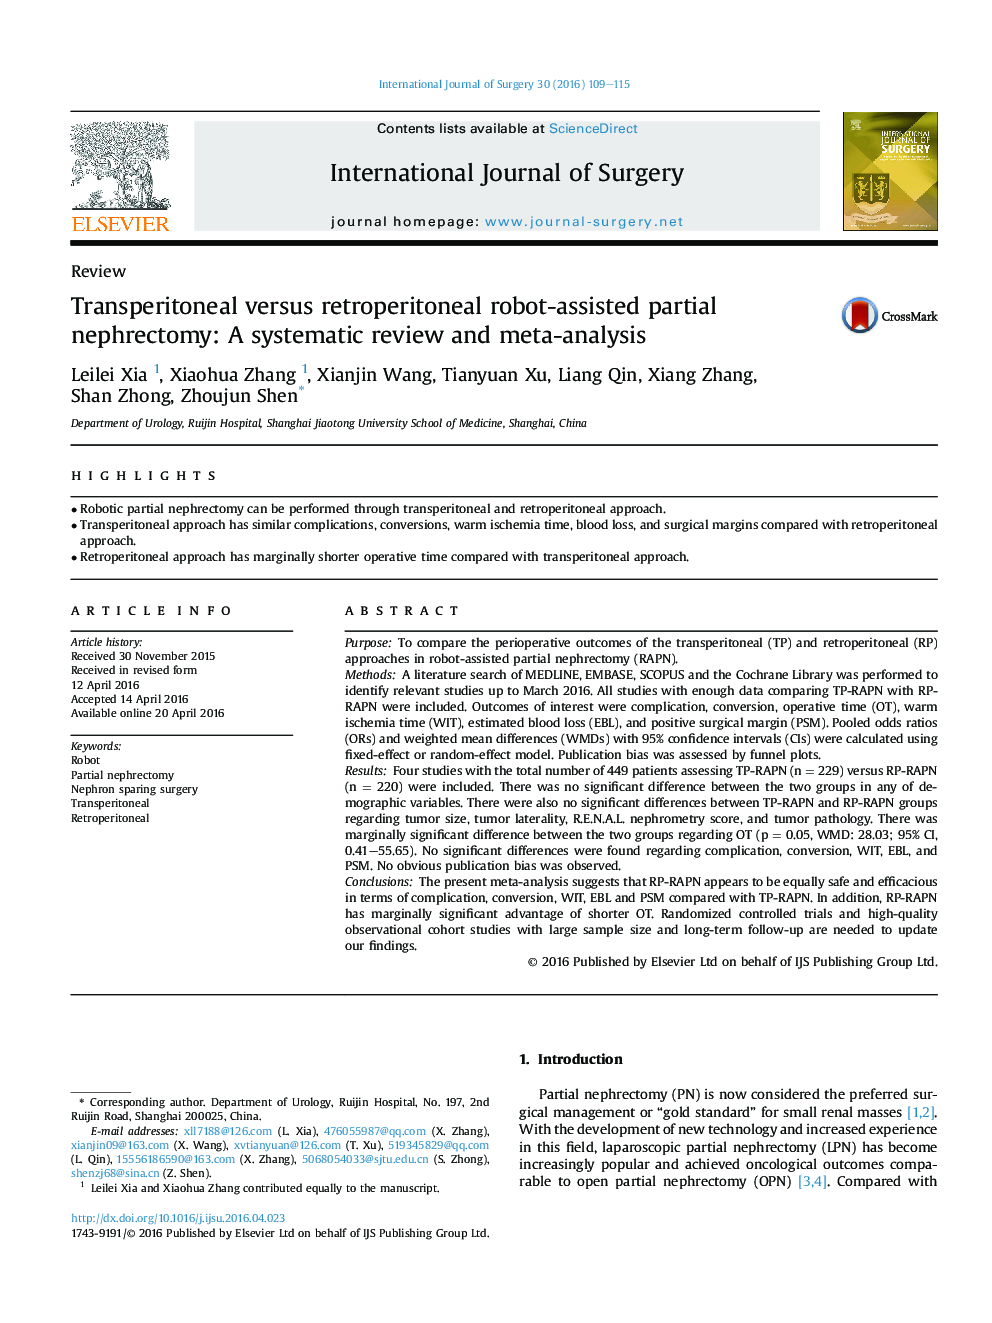 Transperitoneal versus retroperitoneal robot-assisted partial nephrectomy: A systematic review and meta-analysis